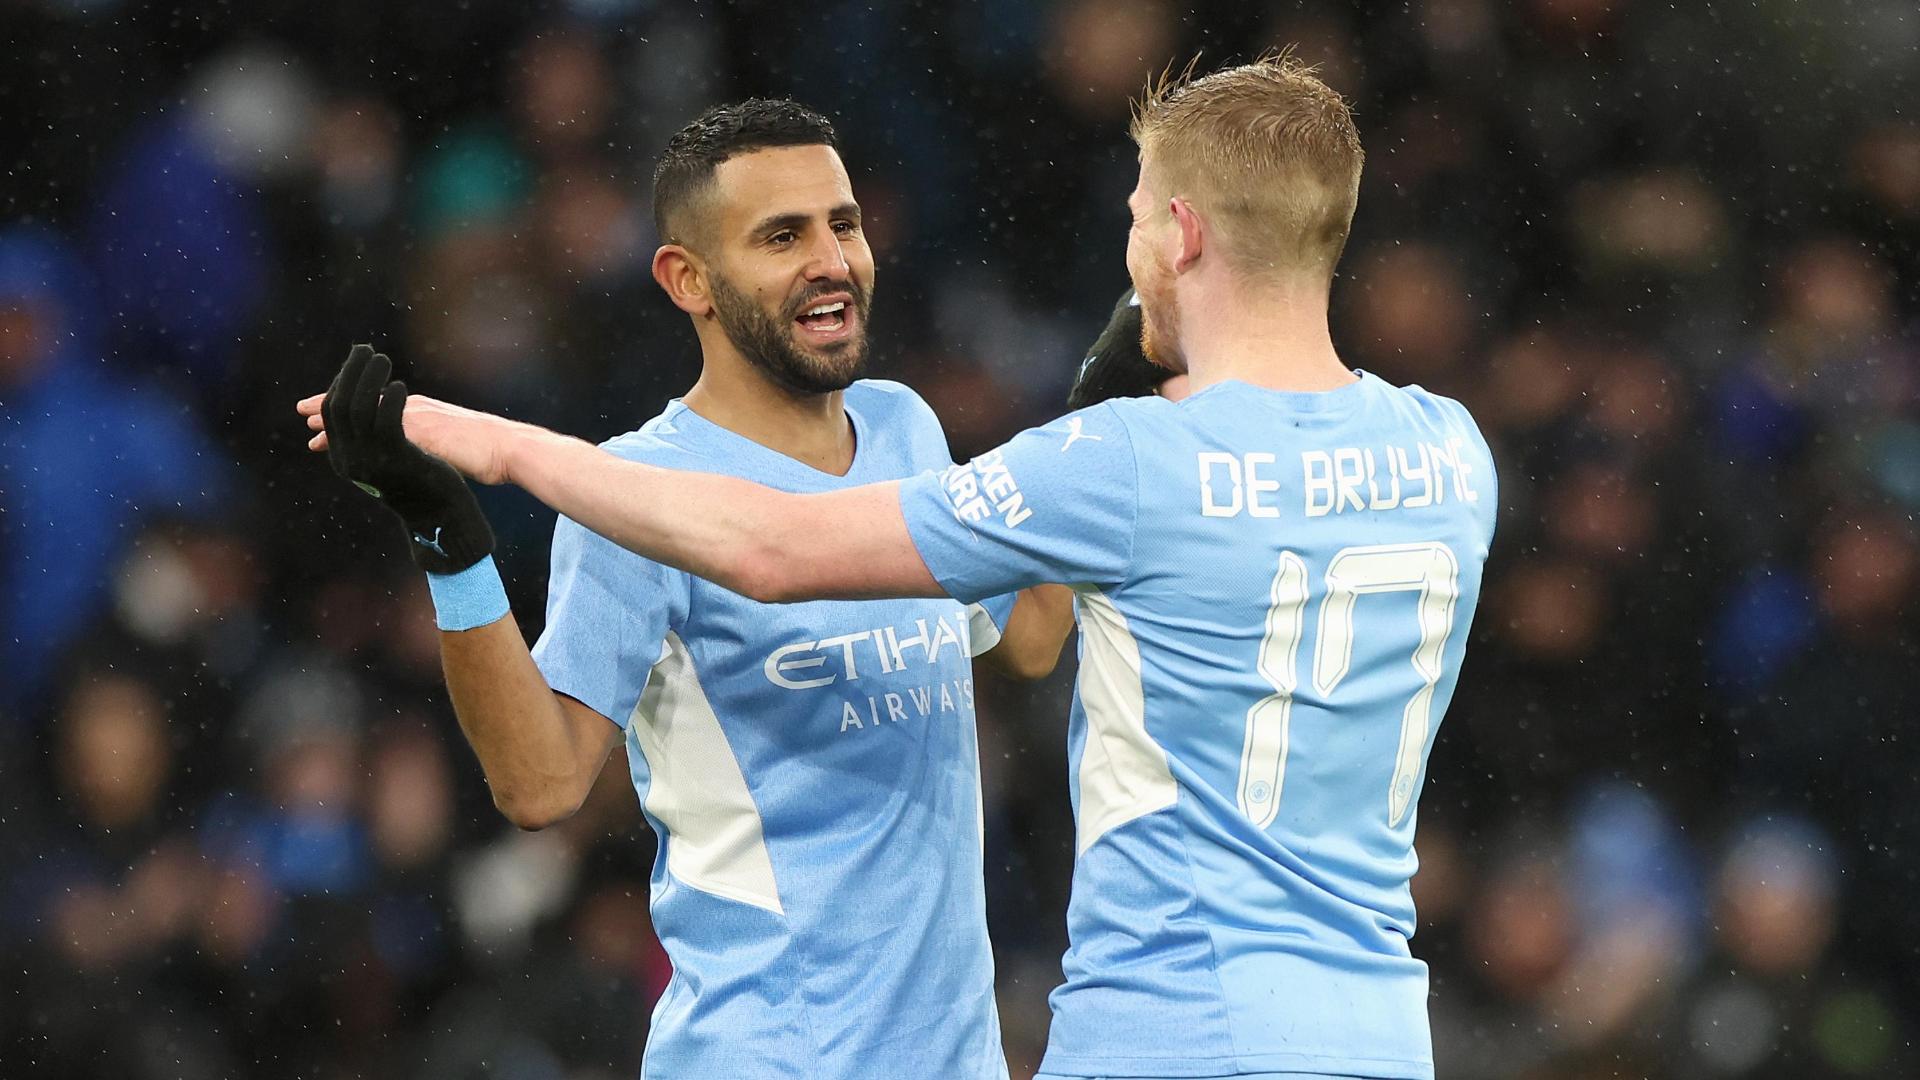 Manchester City 4-1 Fulham - Goals and highlights - FA Cup 21/22